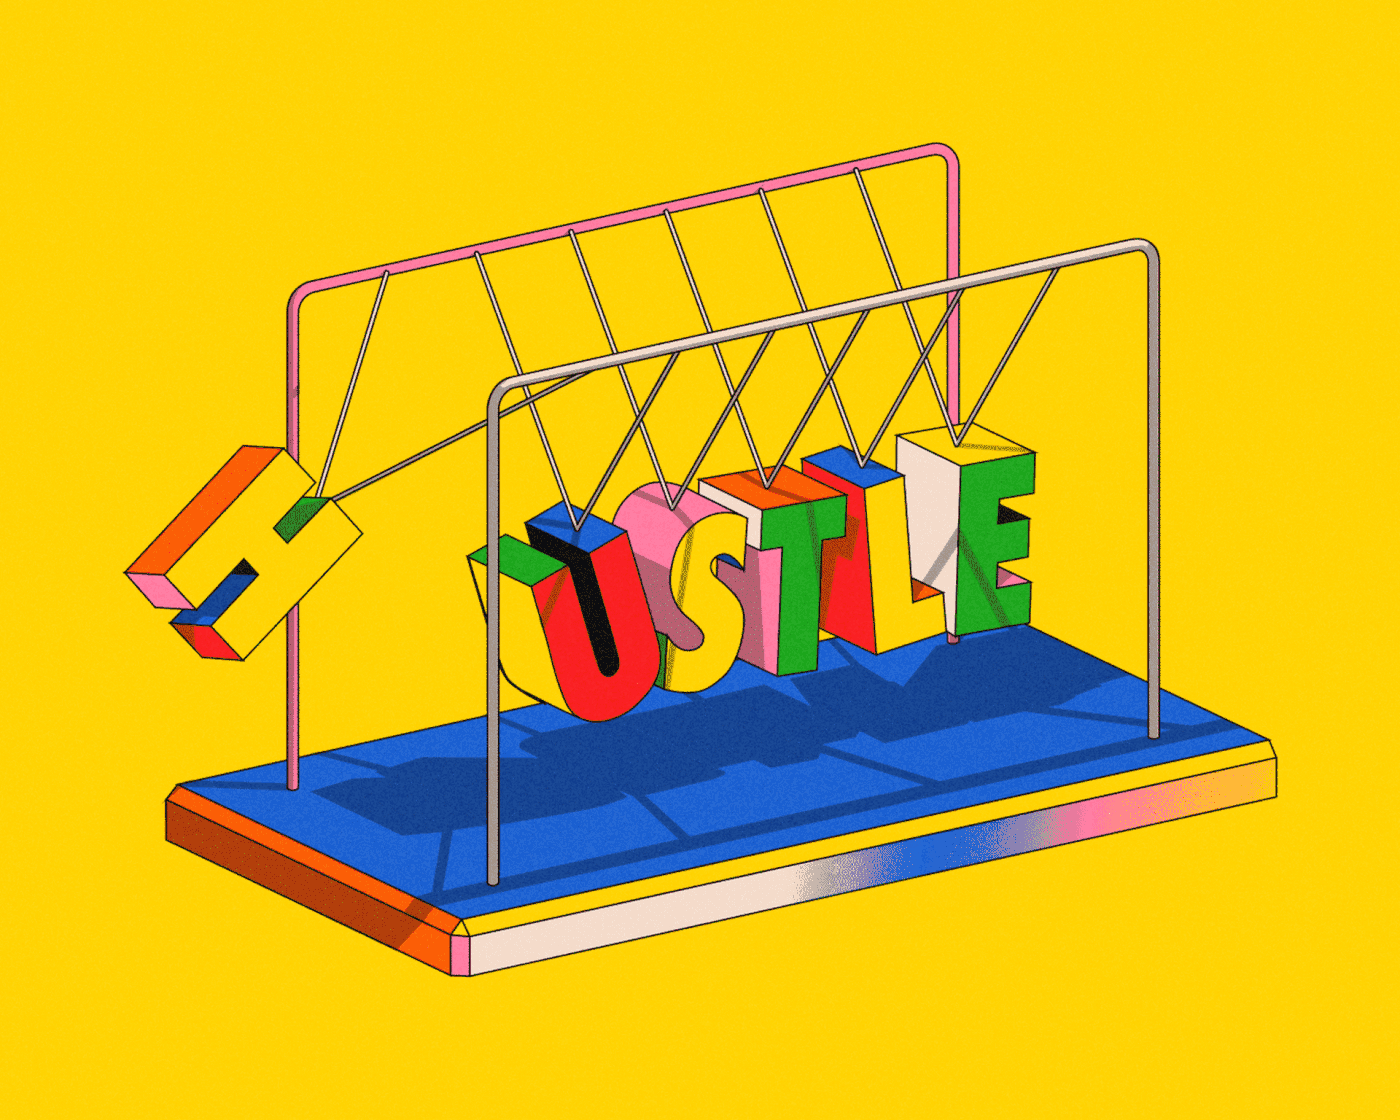 Animated hustle type in newton cradle with bright bold colours. Motion graphics design.